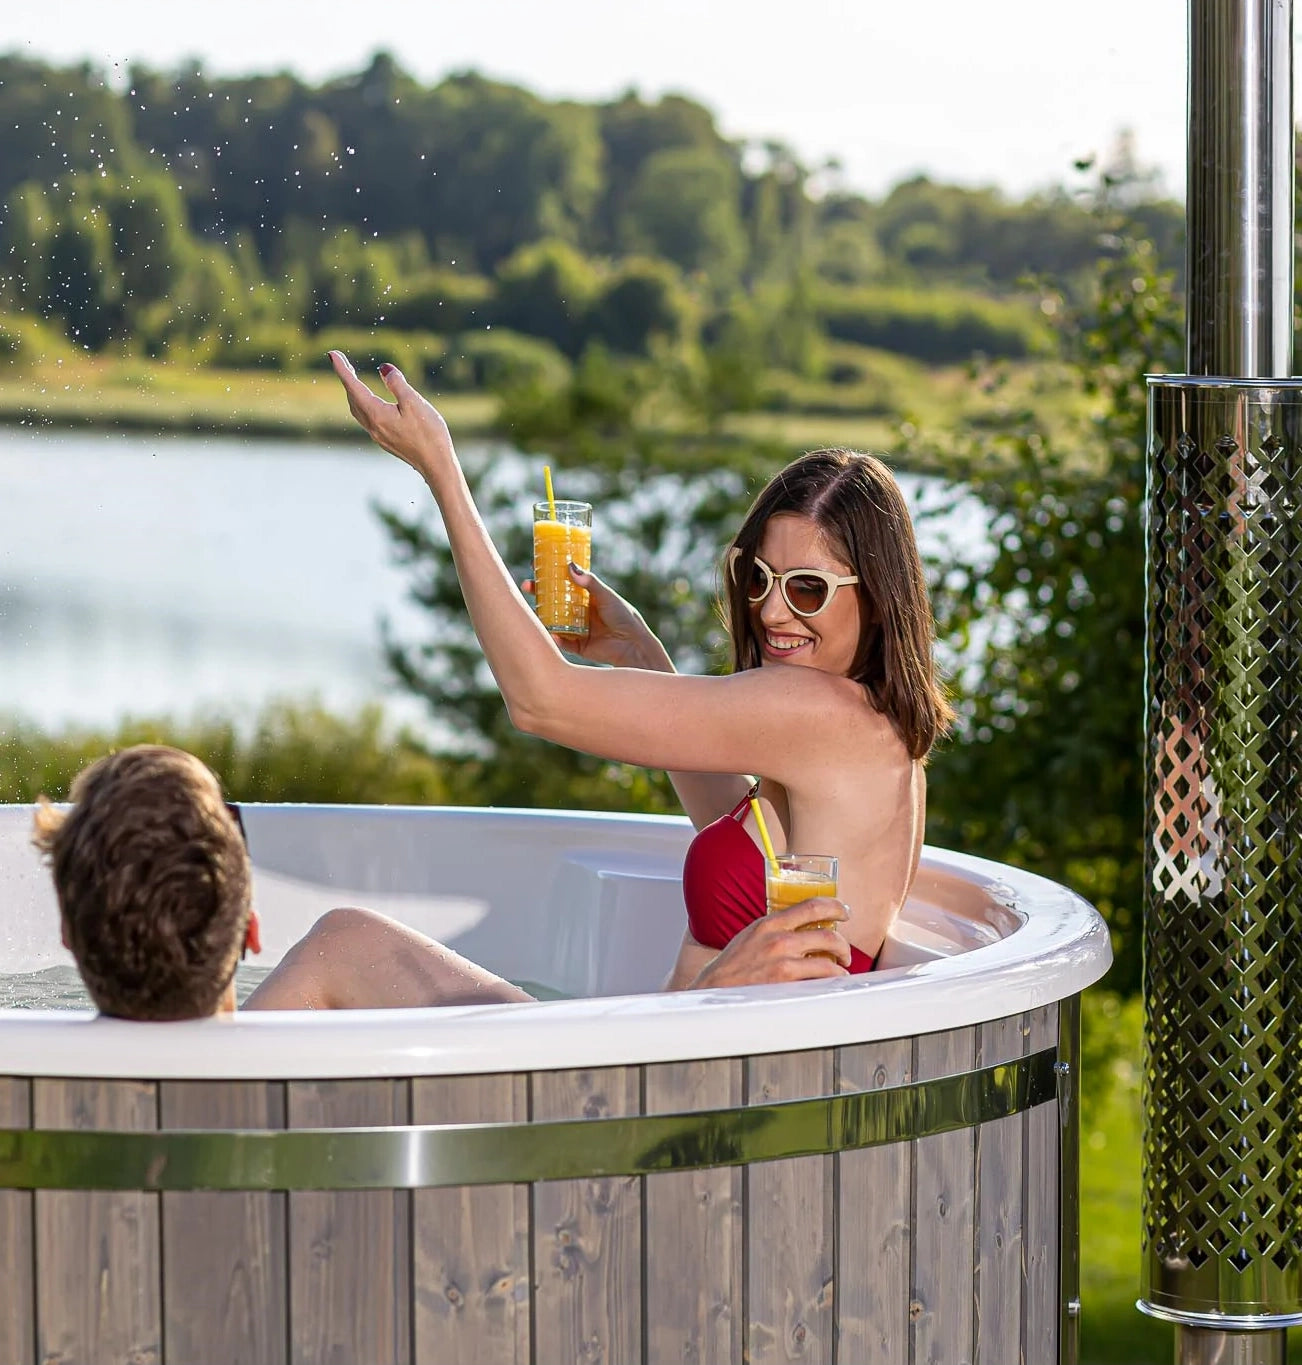 Create unforgettable memories while you embrace Scandinavian tradition with our wood fired spas